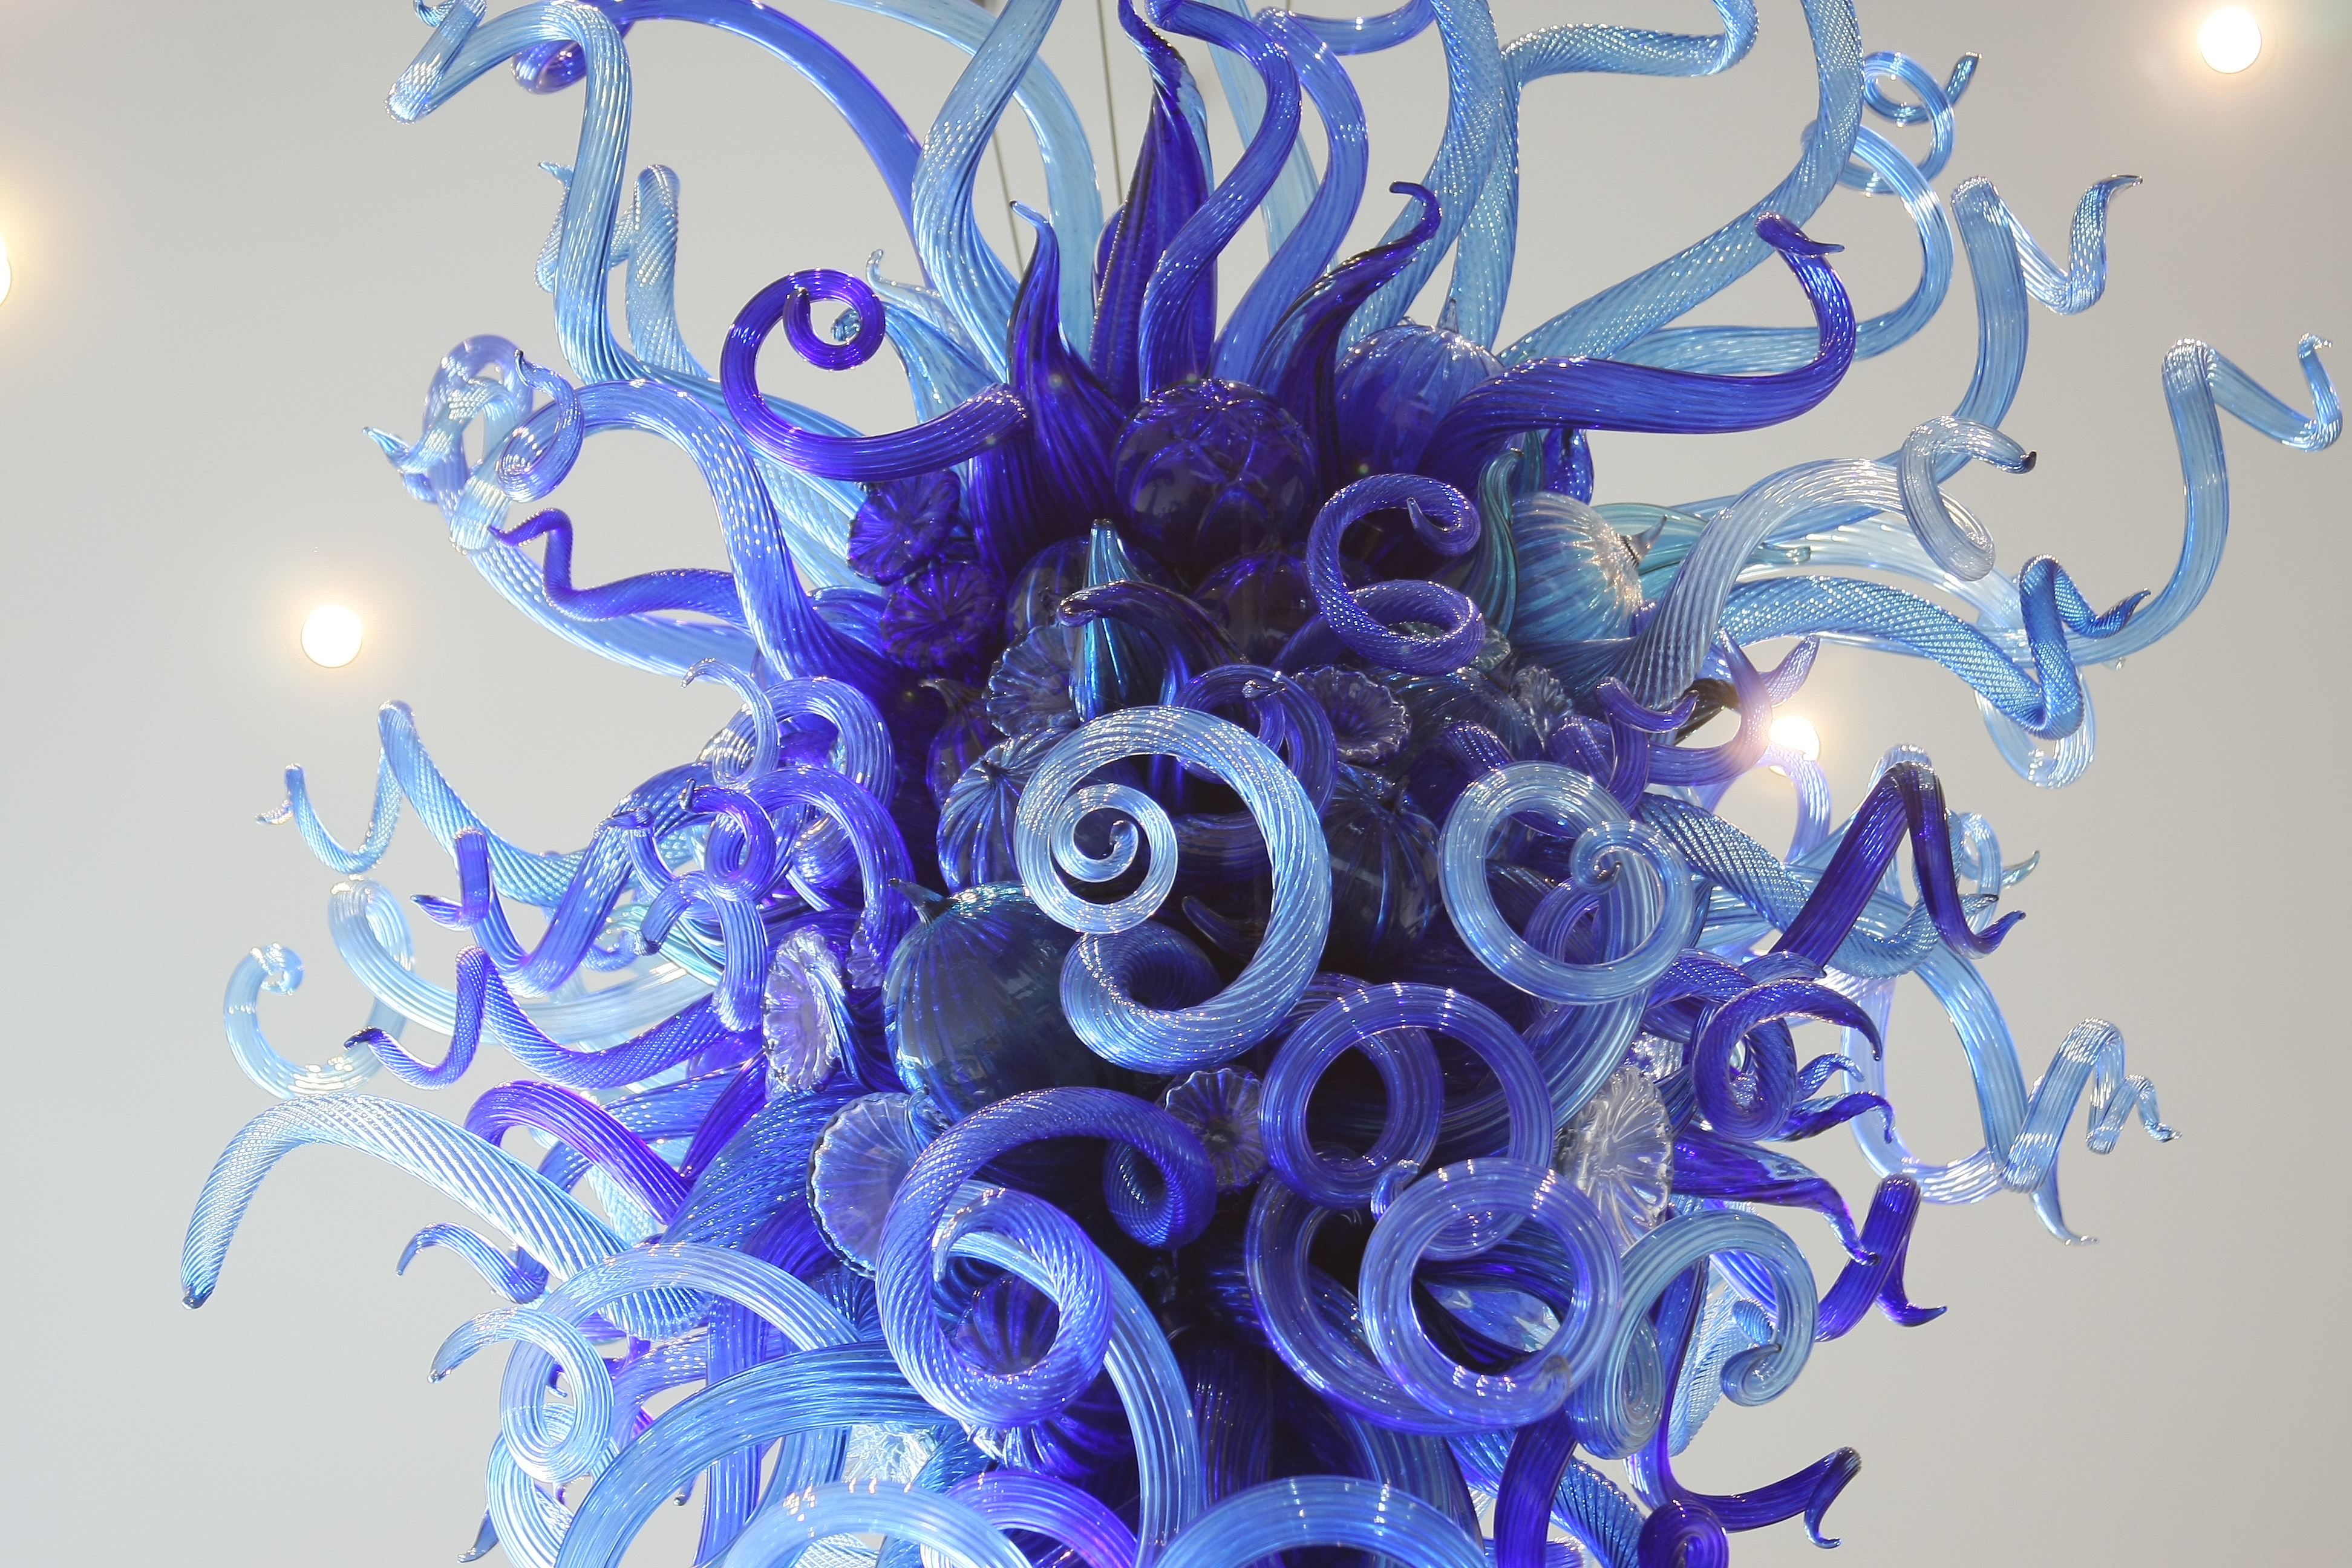 Dale Chihuly, "Blue and Beyond Blue," ca. 2000, Blown Glass, Steel, 107x82x77 in., Stephen B. Lawrence Fund and donors